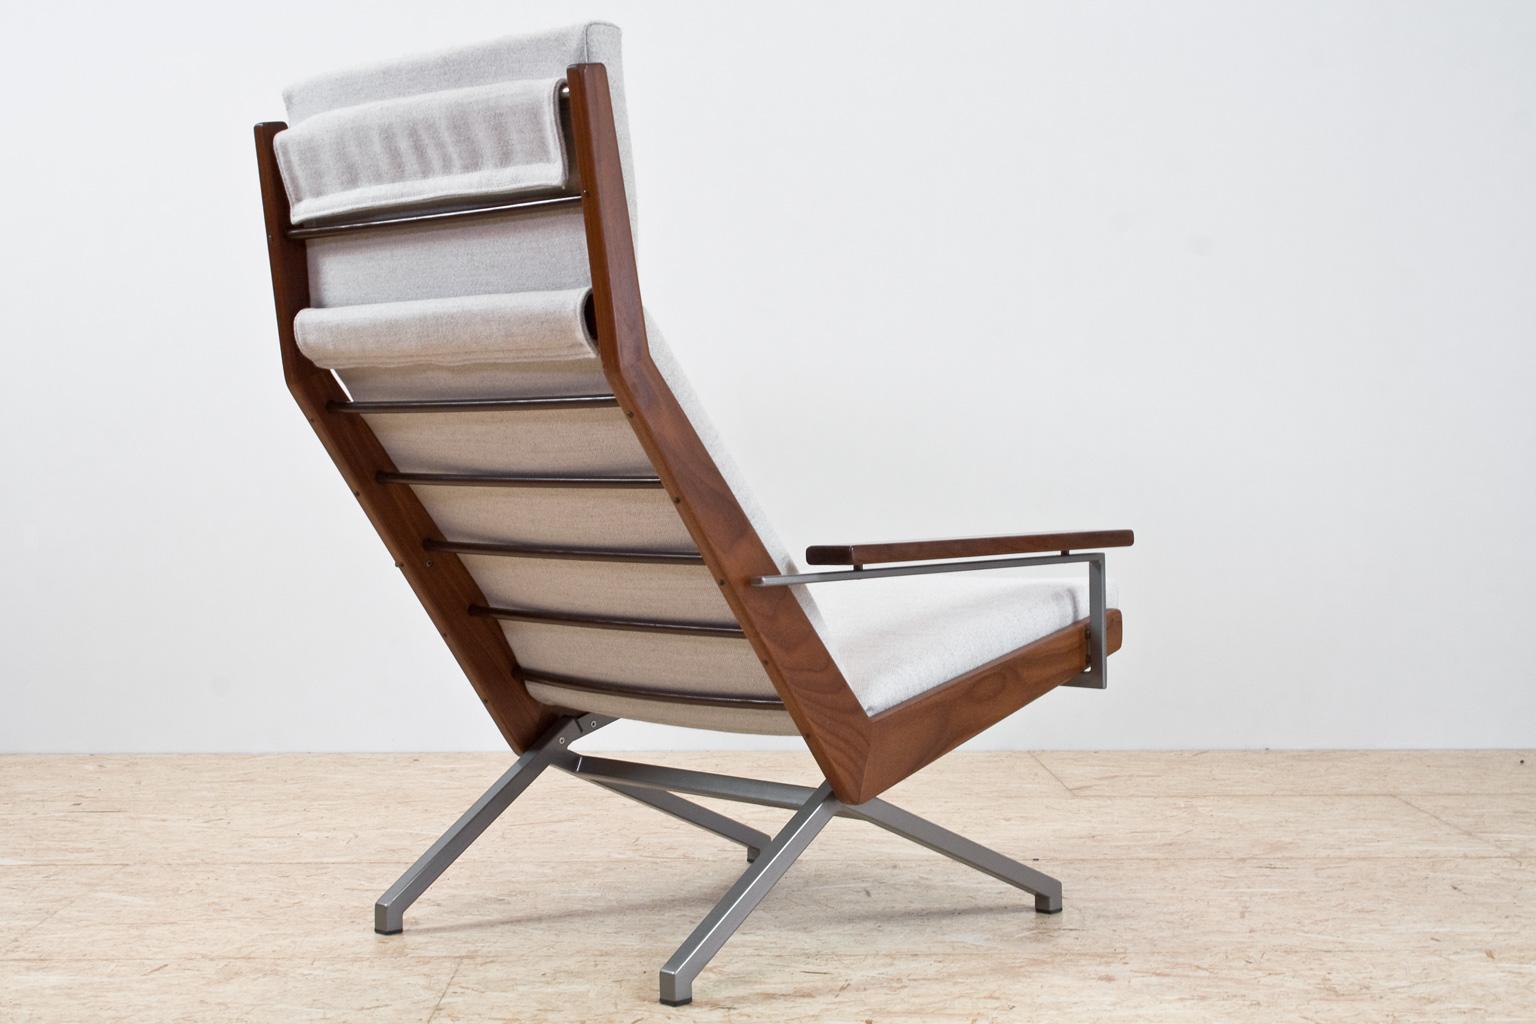 Mid-Century Modern Dutch lounge chair in solid teak by Rob Parry, 1960s the Netherlands for Gelderland De Ster. Elegant, high back and Scandinavian style armchair, seating placed on a grey lacquered pyramide foot. The cushion is completely new and